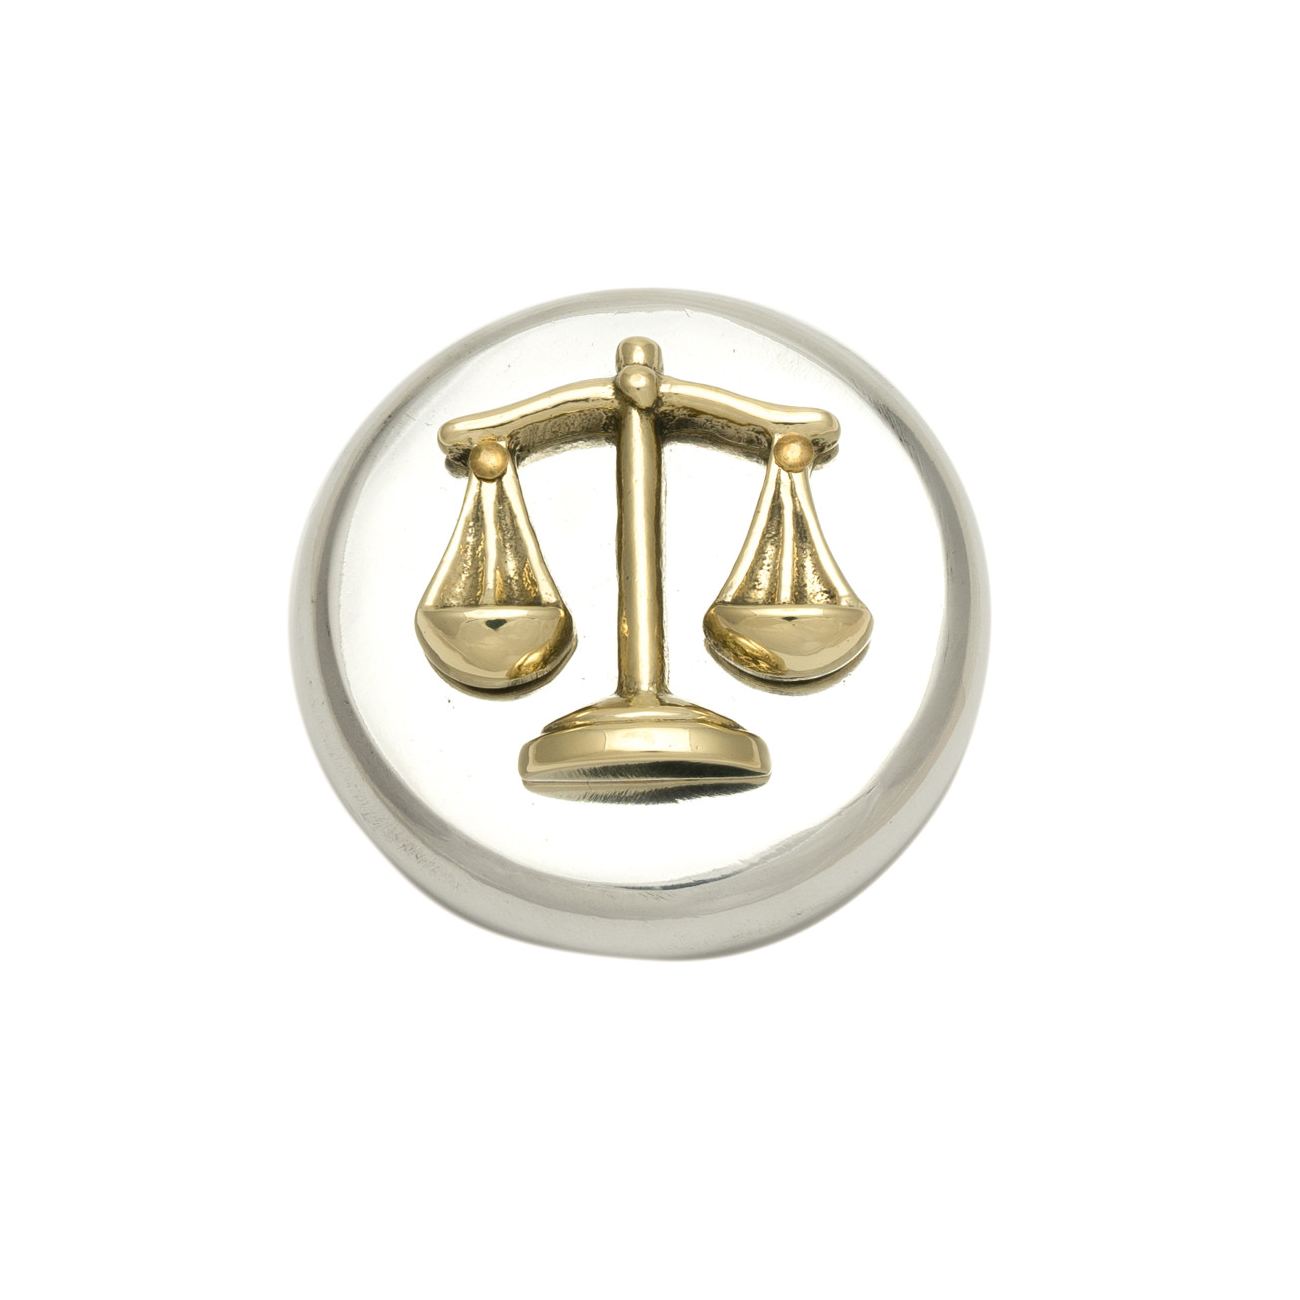 Scales of Justice Lawyer's Two Piece Pen Set 